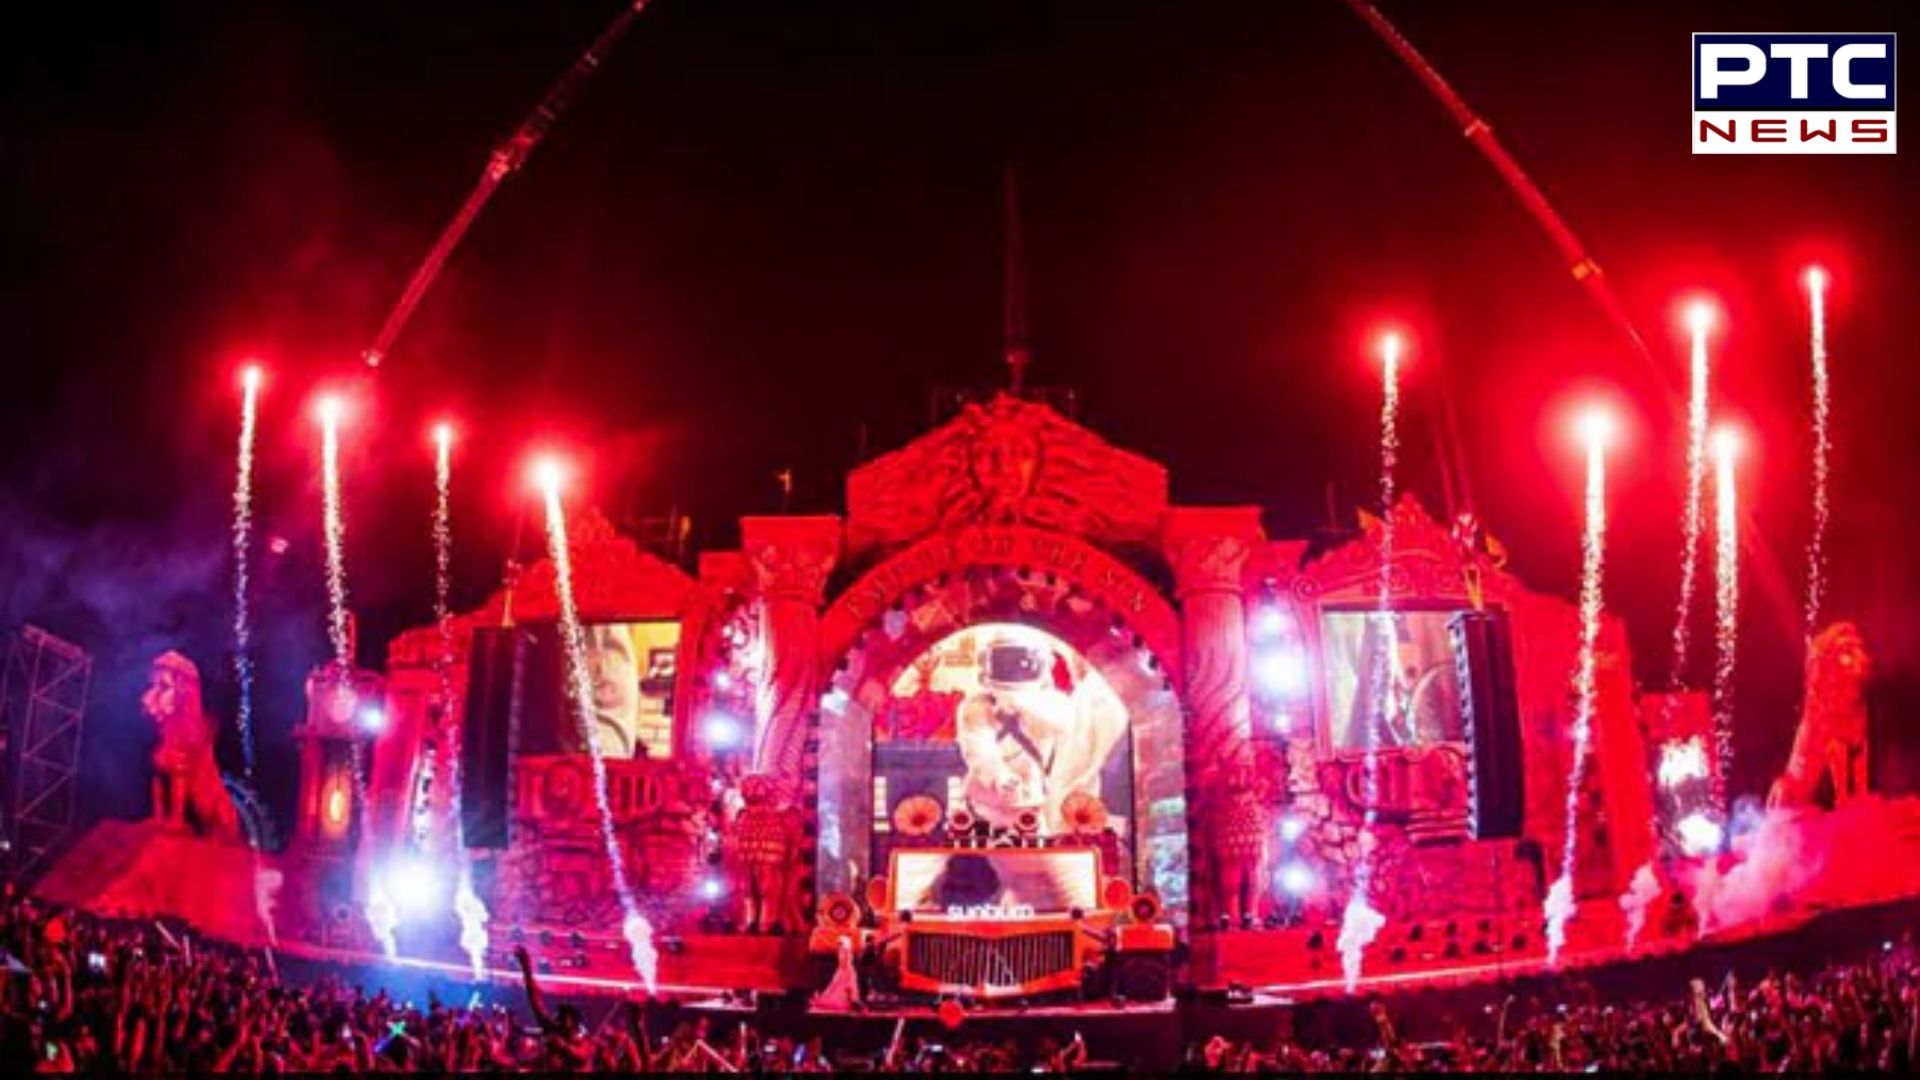 Sunburn festival's Lord Shiva image sparks controversy, prompts complaint